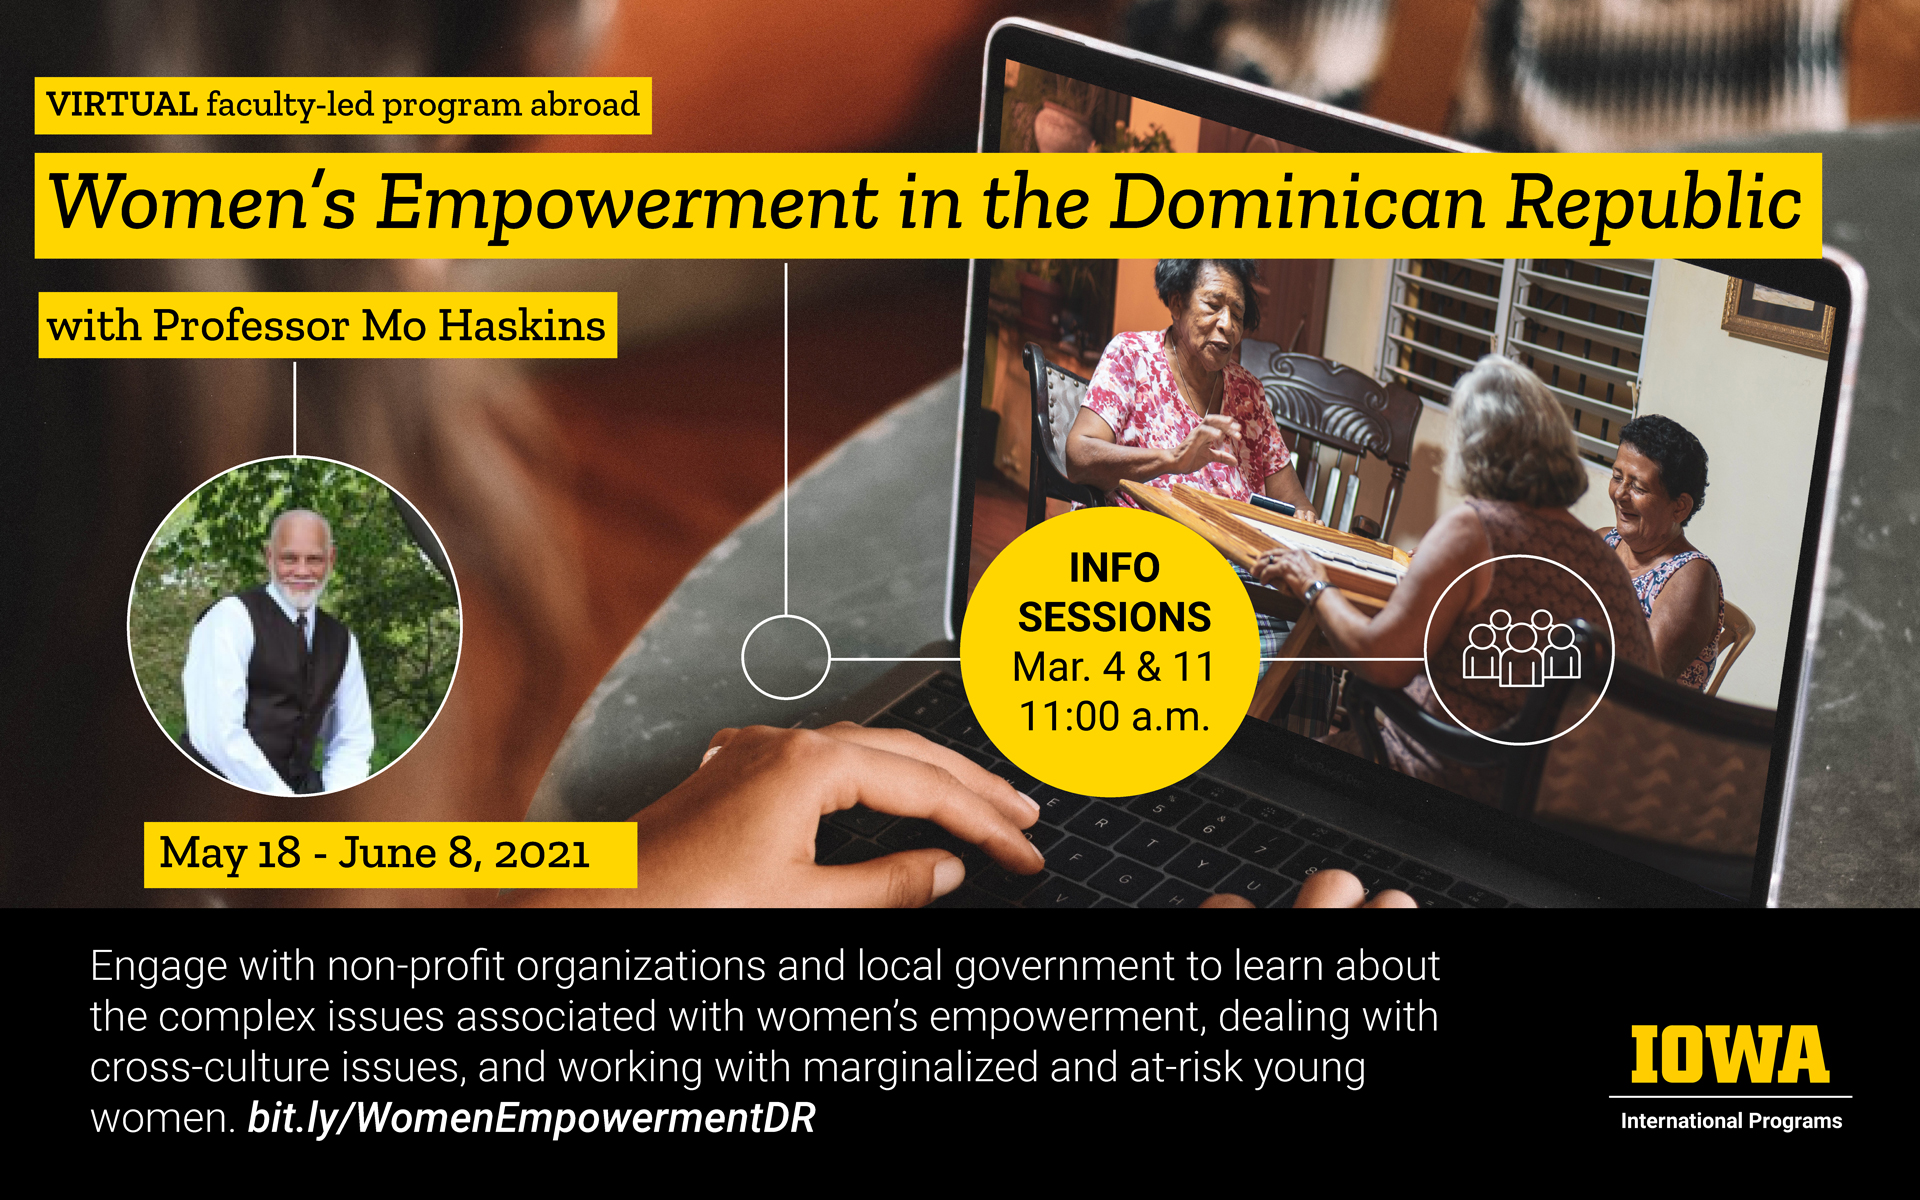 Virtual faculty-led program abroad Women's Empowerment in the Dominican Republic with Professor Mo Haskins happening May 18-June 8, 2021. Info sessions on March 4 and 11, 2021 at 11:00am. Engage with non-profit organizations and local government to learn about the complex issues associate with women's empowerment, dealing with cross-culture issues, and working with marginalized and at-risk young women. bit.ly/WomenEmpowermentDR